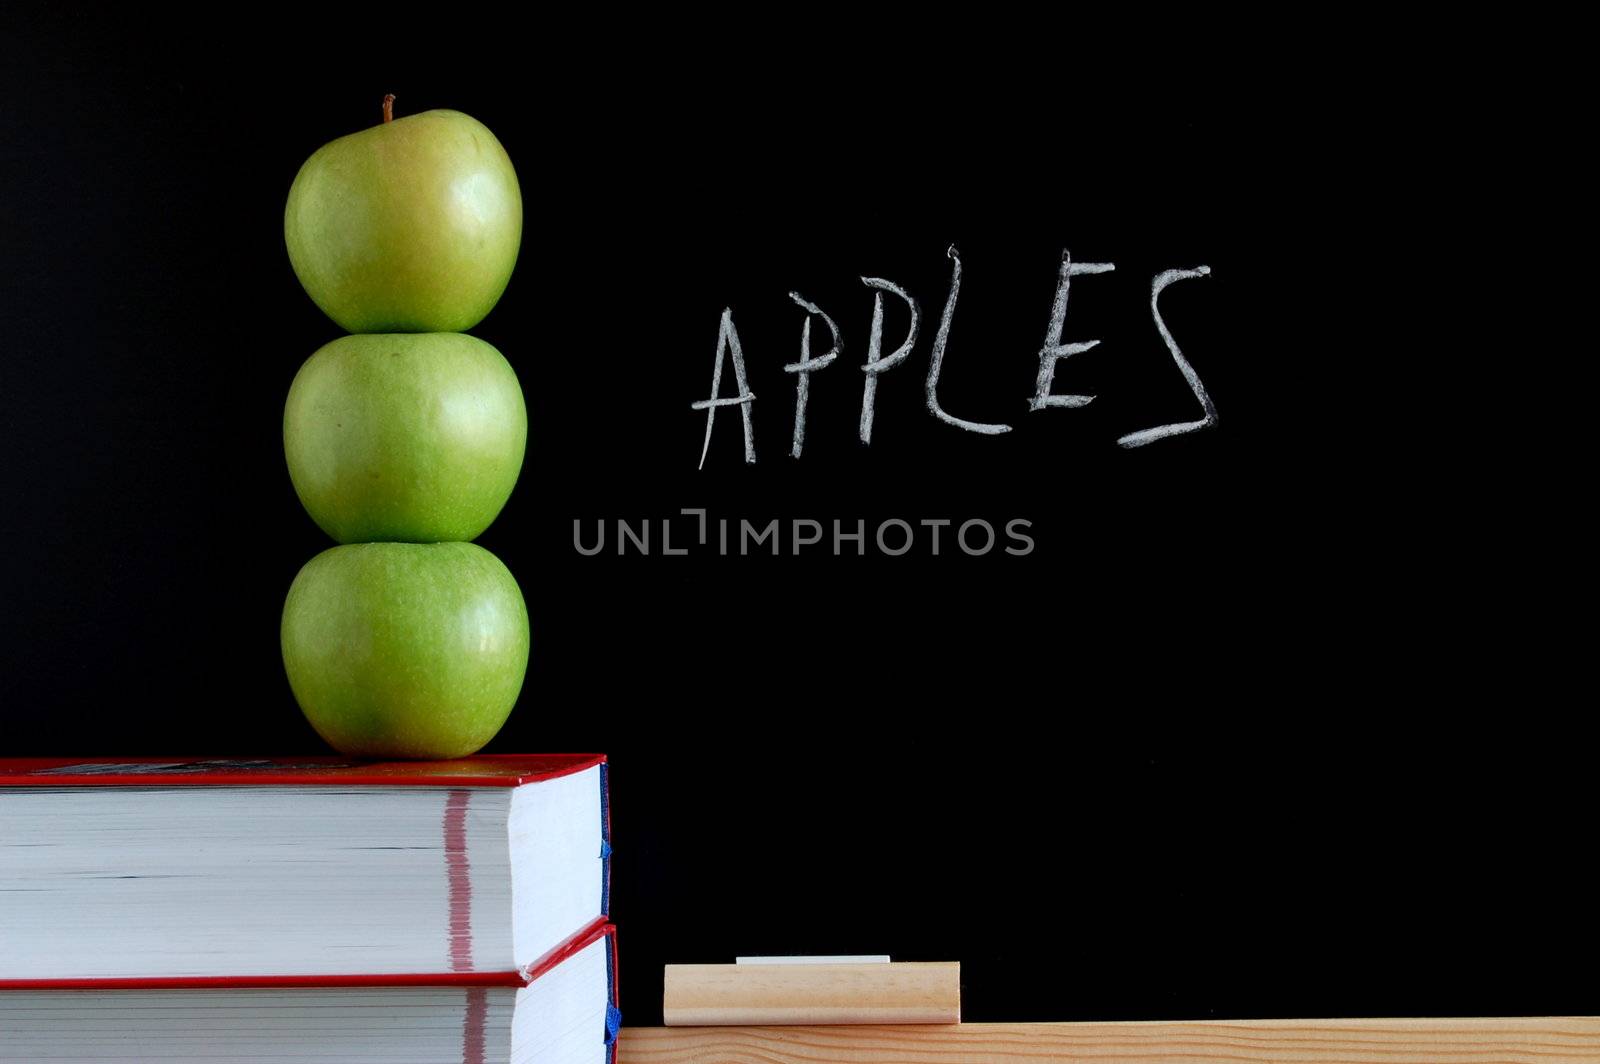 apples books and chalkboard showing healthy lifestyle